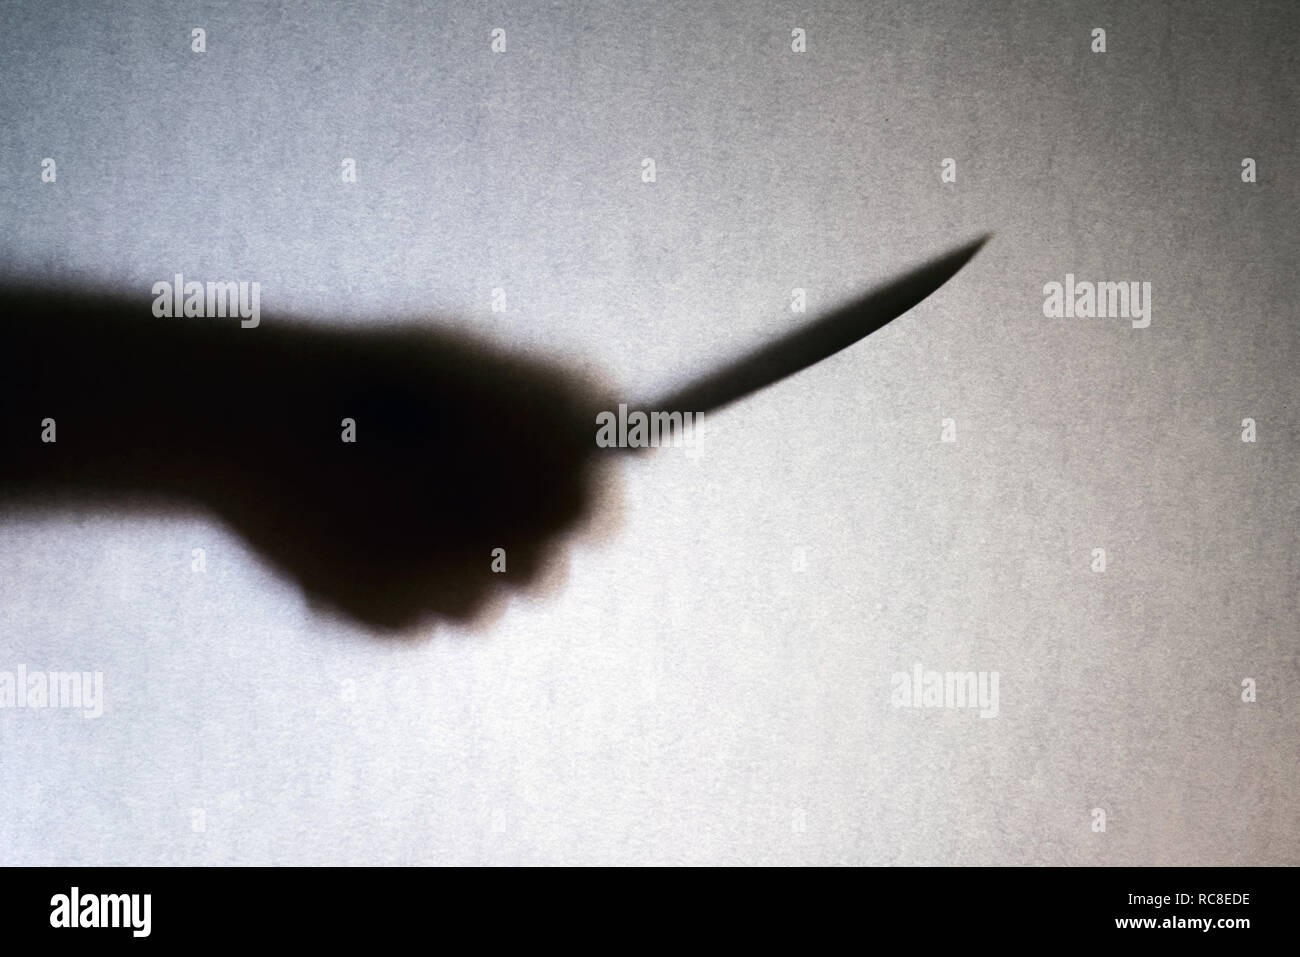 Big knife in robbers hand silhouette isolated on grey background. Homicide, robbery, crime Stock Photo